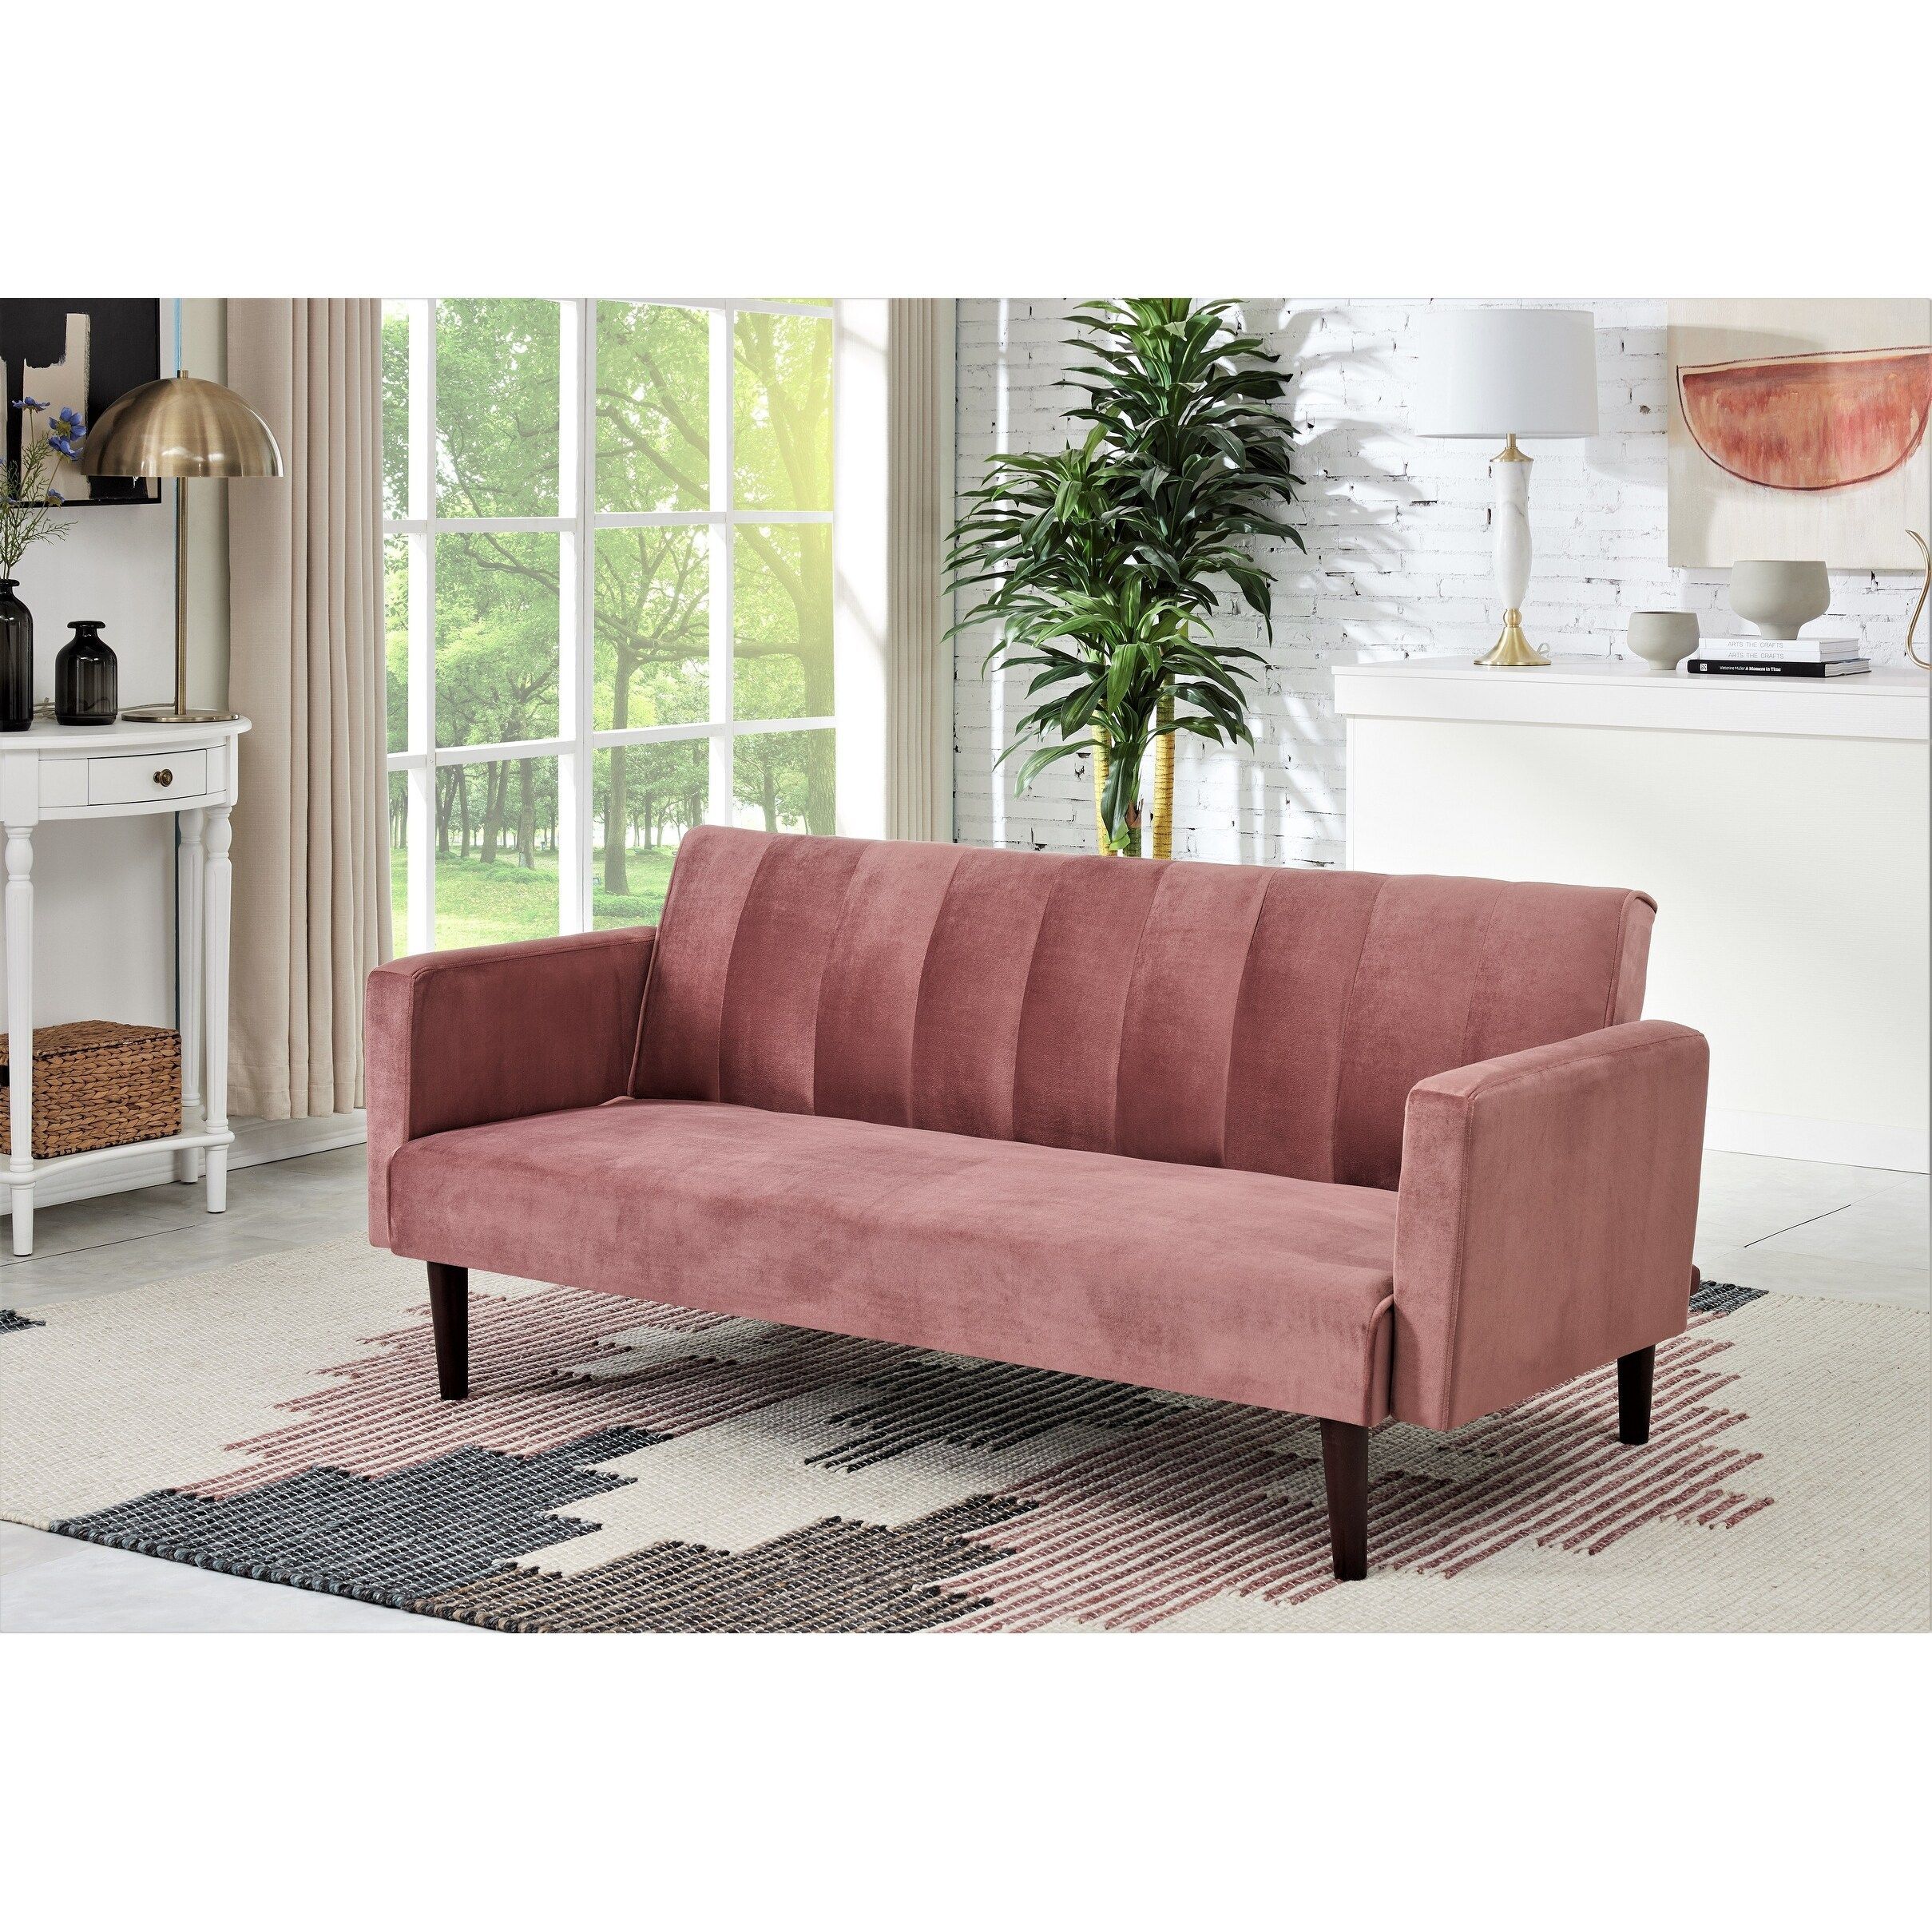 Container Furniture Srtip Convertible Velvet Sofa Bed – Overstock Inside 66" Convertible Velvet Sofa Beds (View 4 of 20)